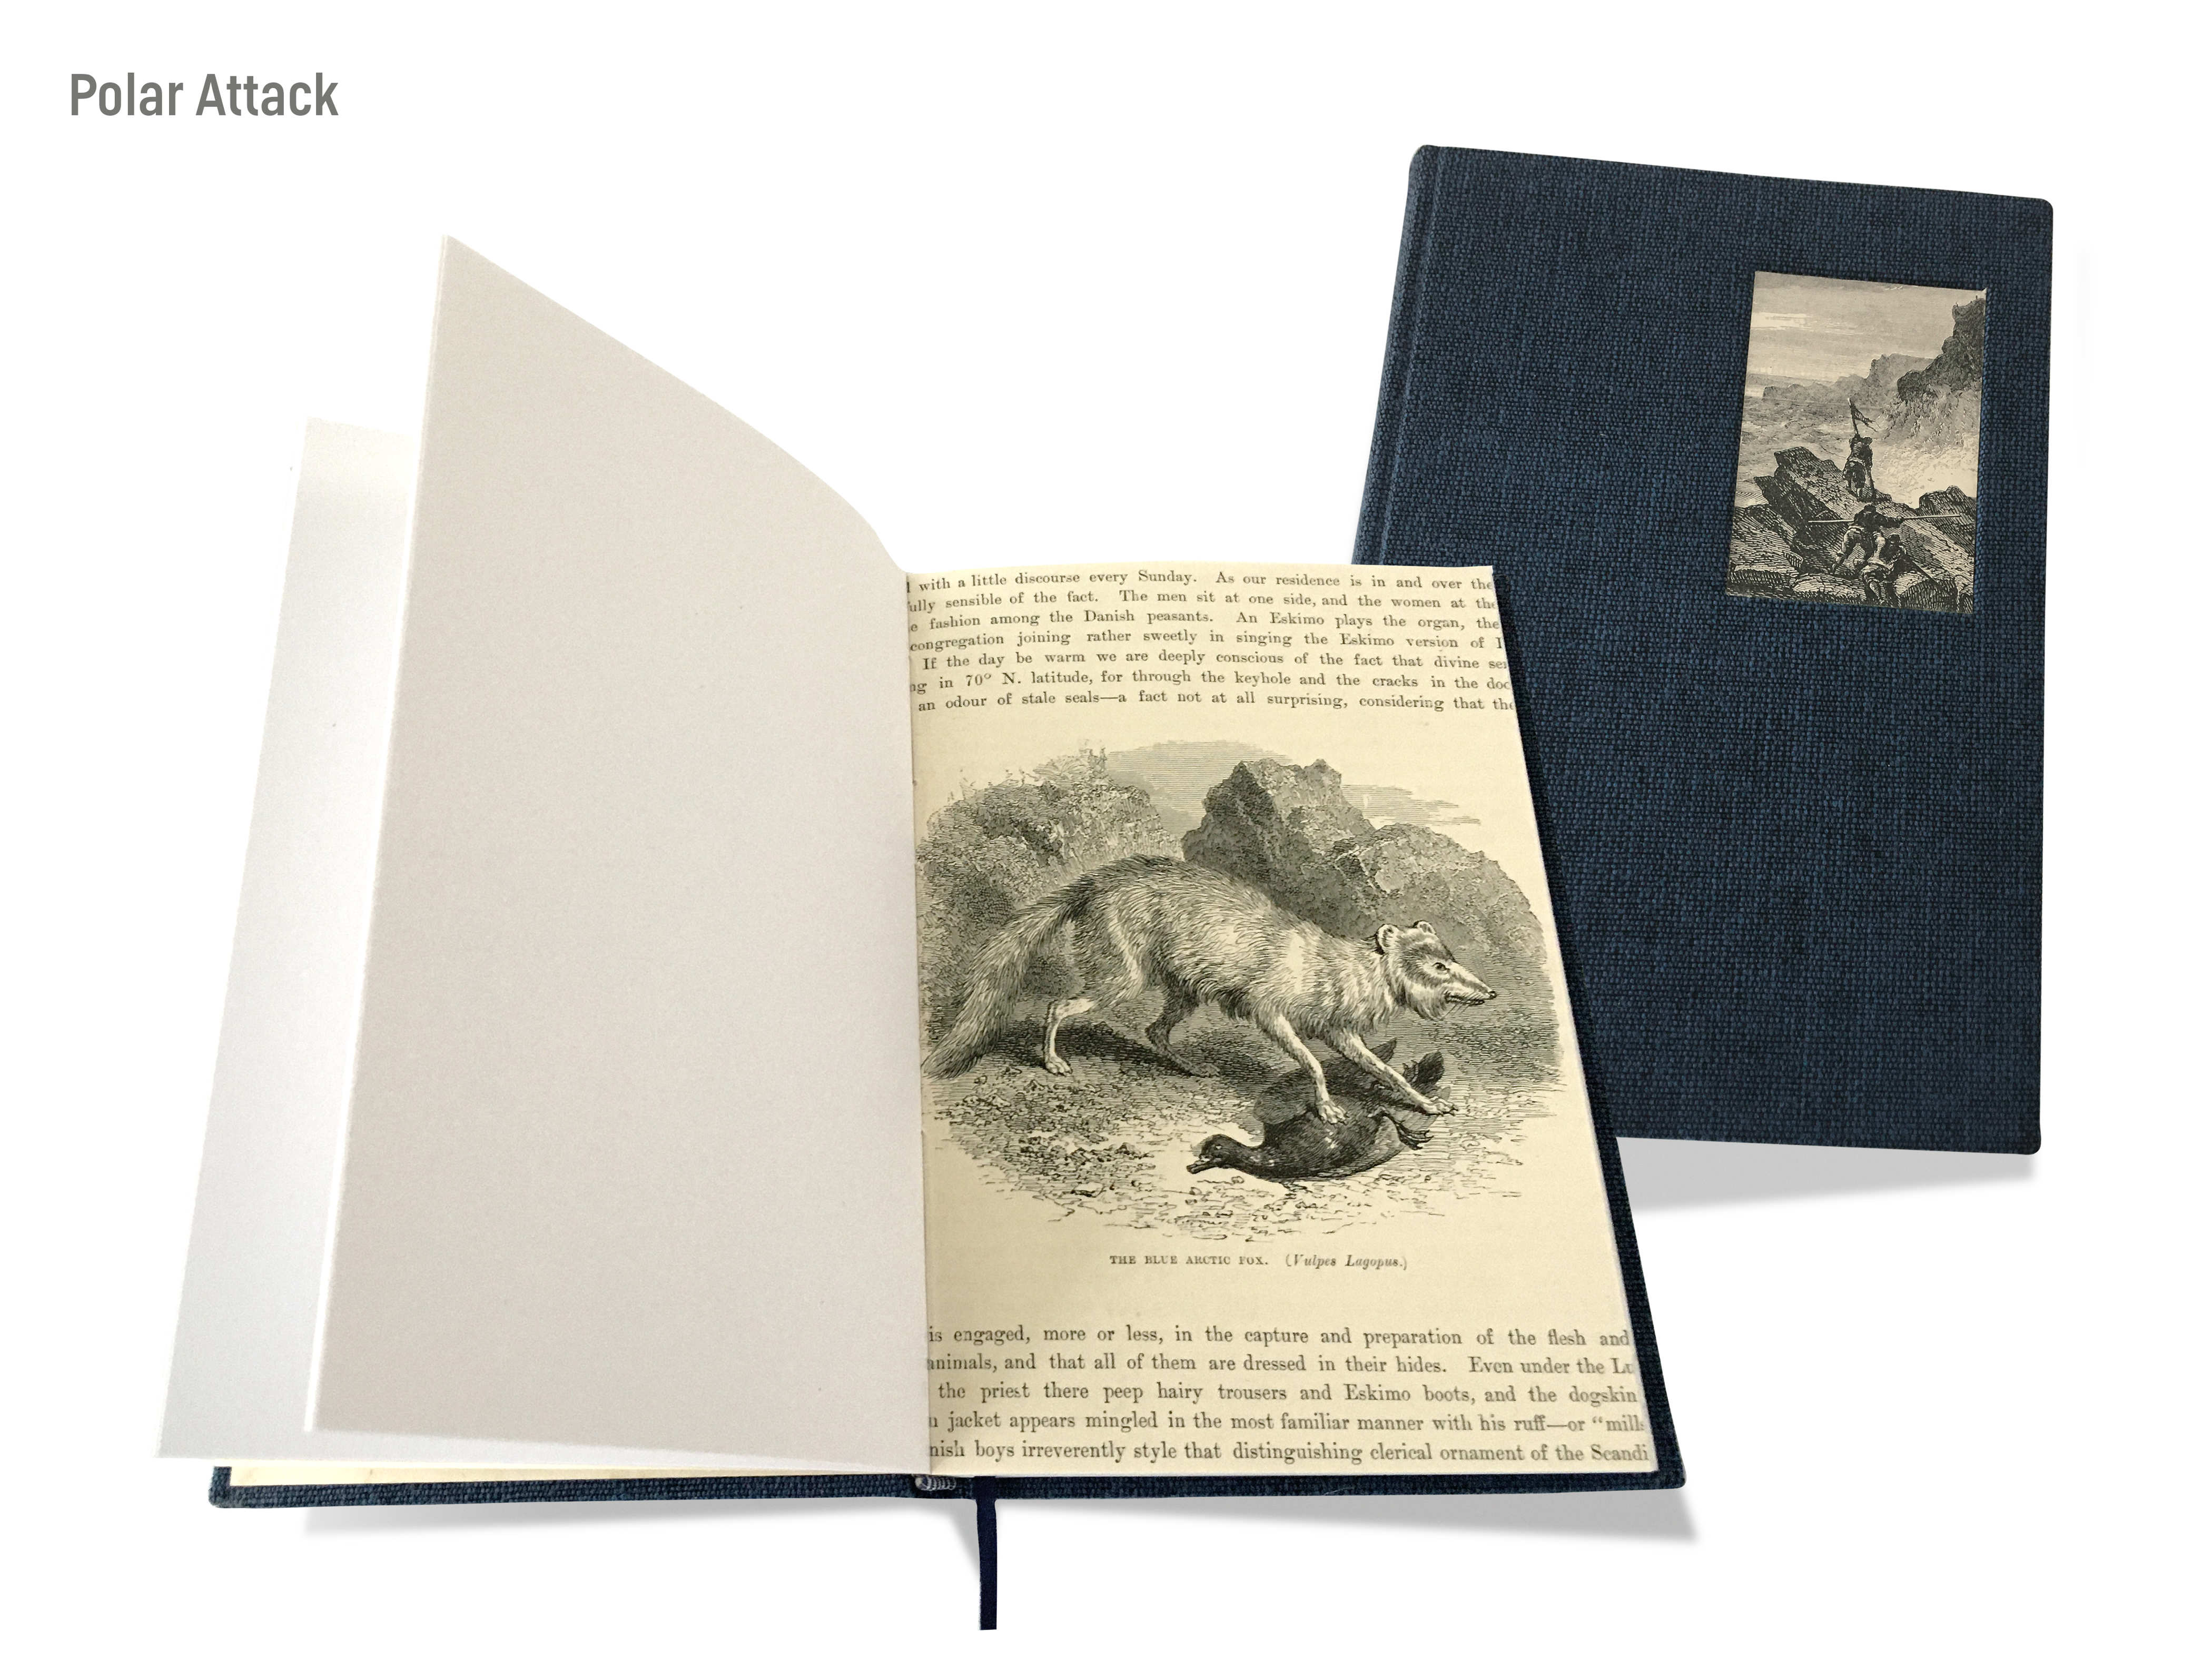 A montage image of a cover and a double-page spread of the hand-made journal titled, ‘Polar attack’ by Michael Small, featuring a dark grey linen cover with a line engraving of a flag raising by arctic explorers and a double-page spread with a blank page and text with a line engraving of a blue arctic fox.